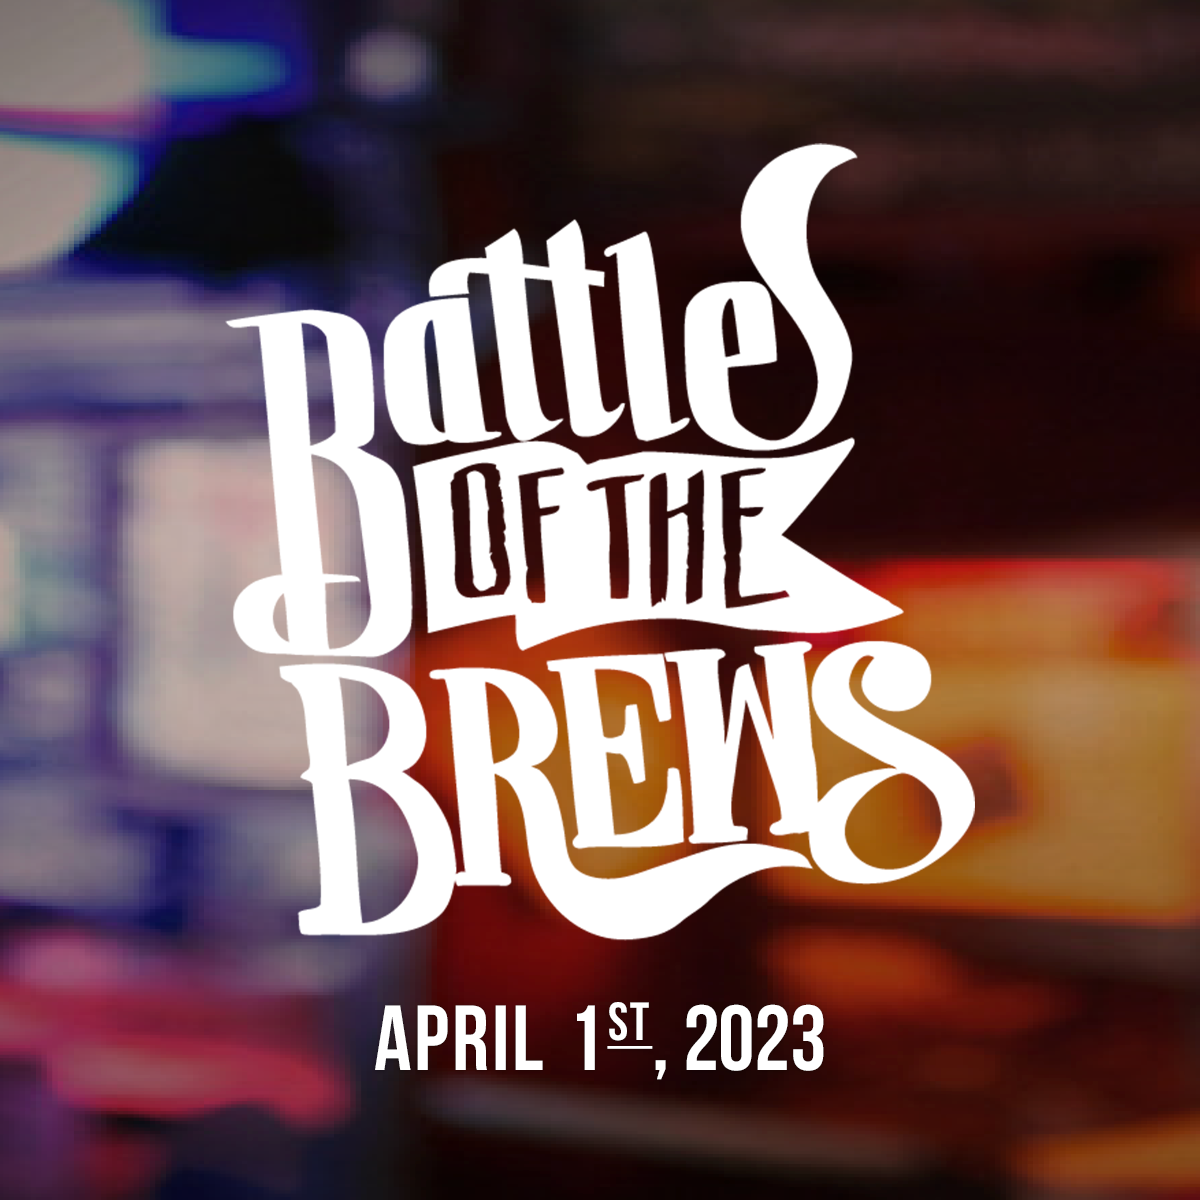 Battle of the Brews social image square 2023